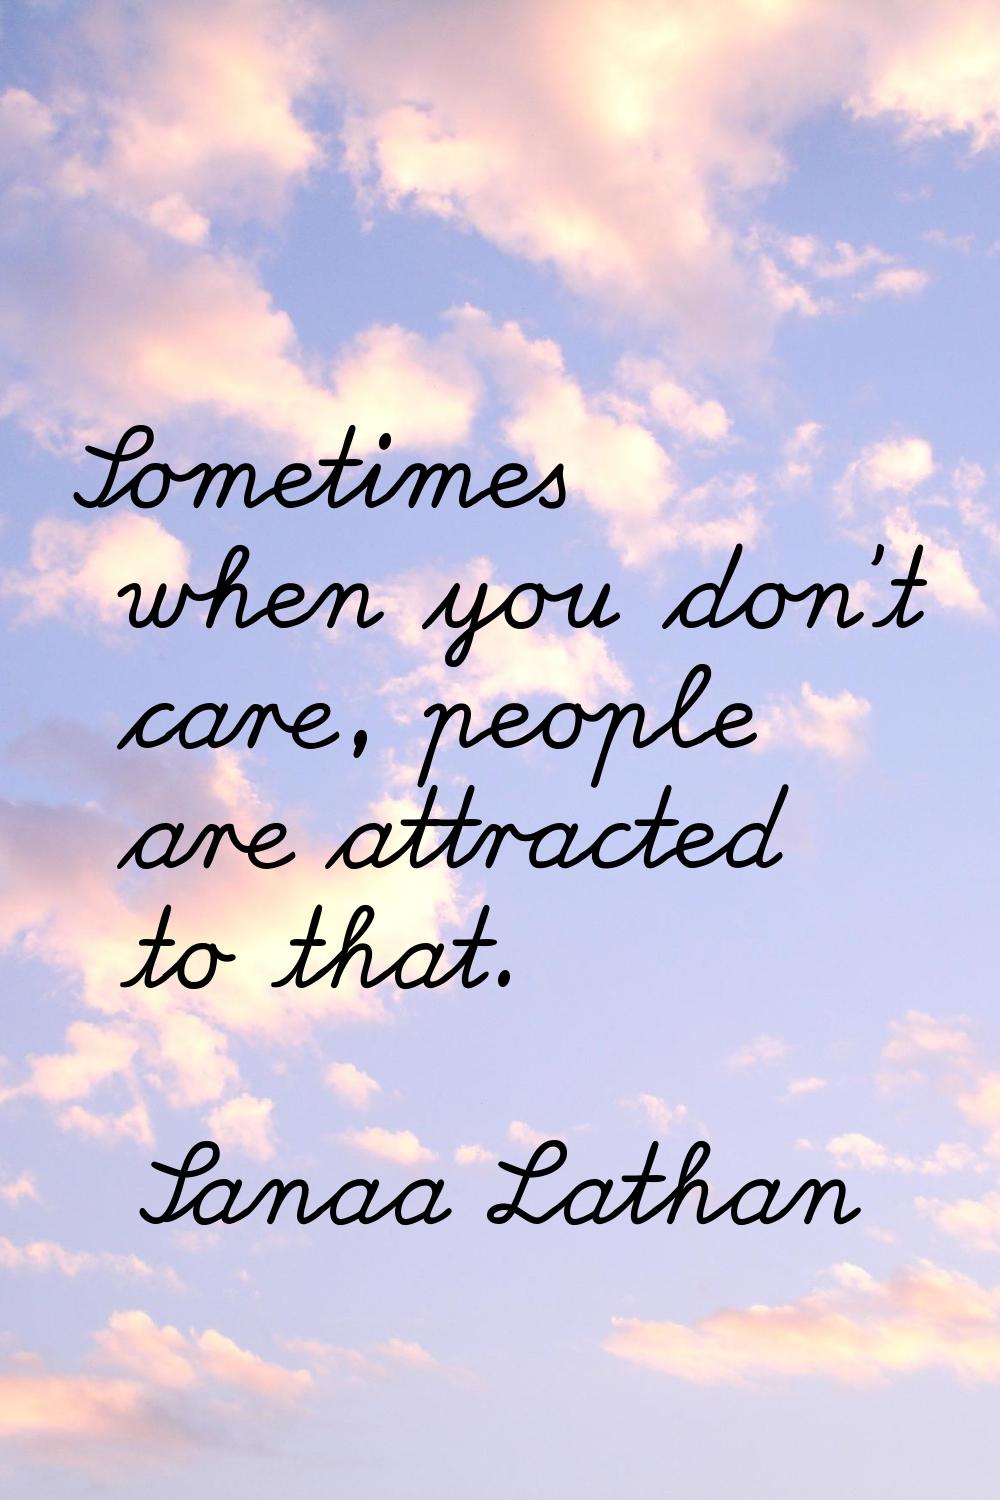 Sometimes when you don't care, people are attracted to that.